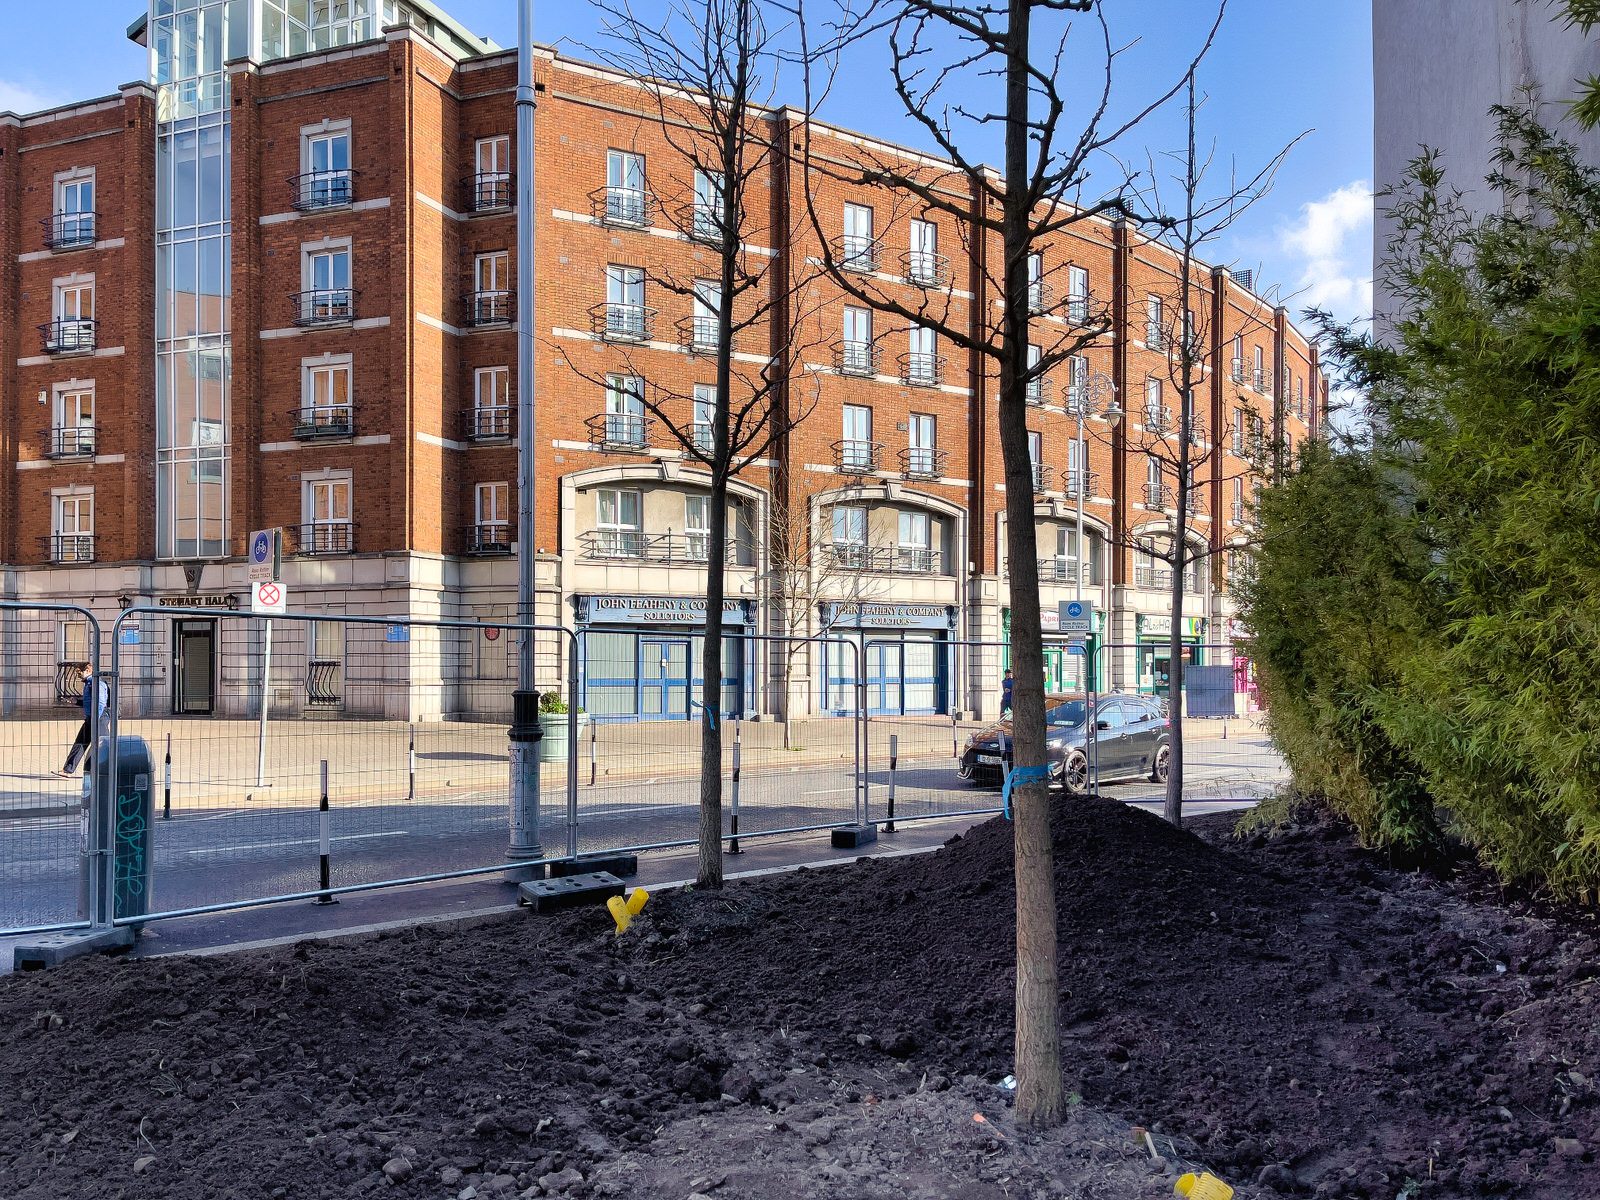 NEW LANDSCAPING UNDERWAY AT RYDERS ROW IN DUBLIN 009